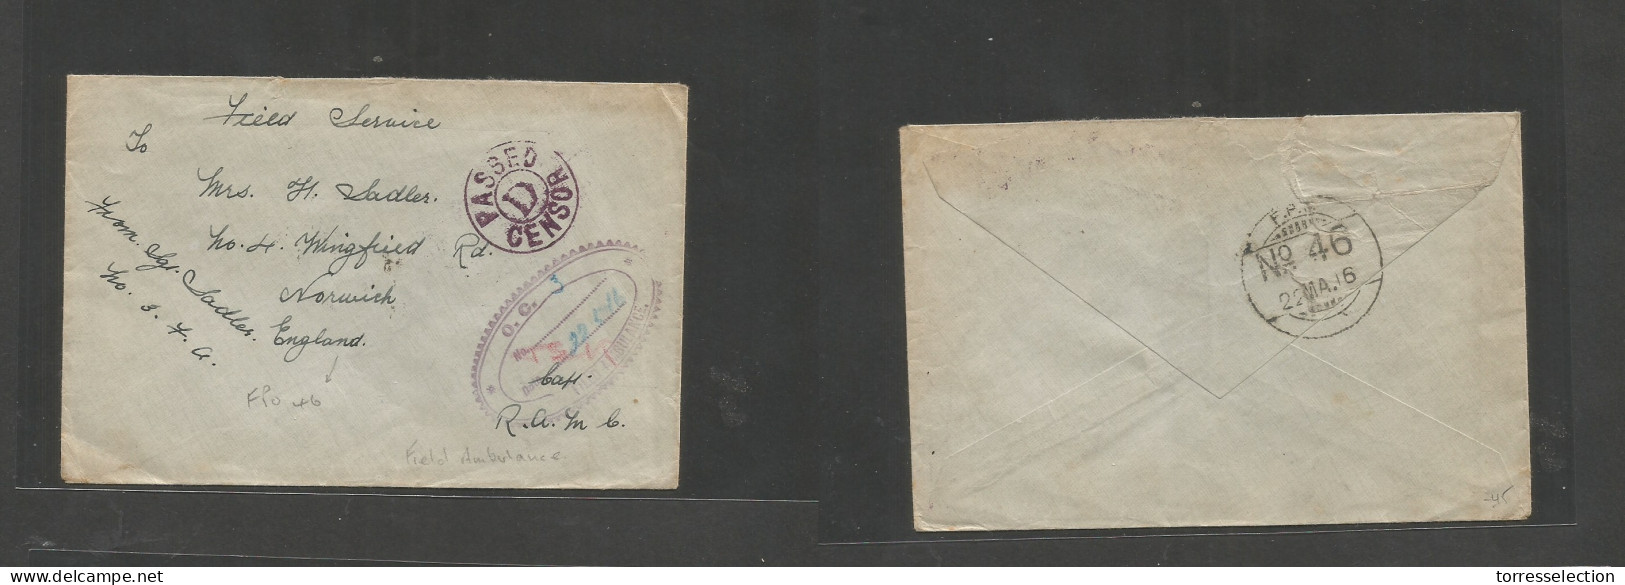 IRAQ. 1916 (22 May) WWI. FPO Nº 46. Field Service Envelope Ciruclated To Norwich, England. Censor Cachet + Oval "Field A - Iraq